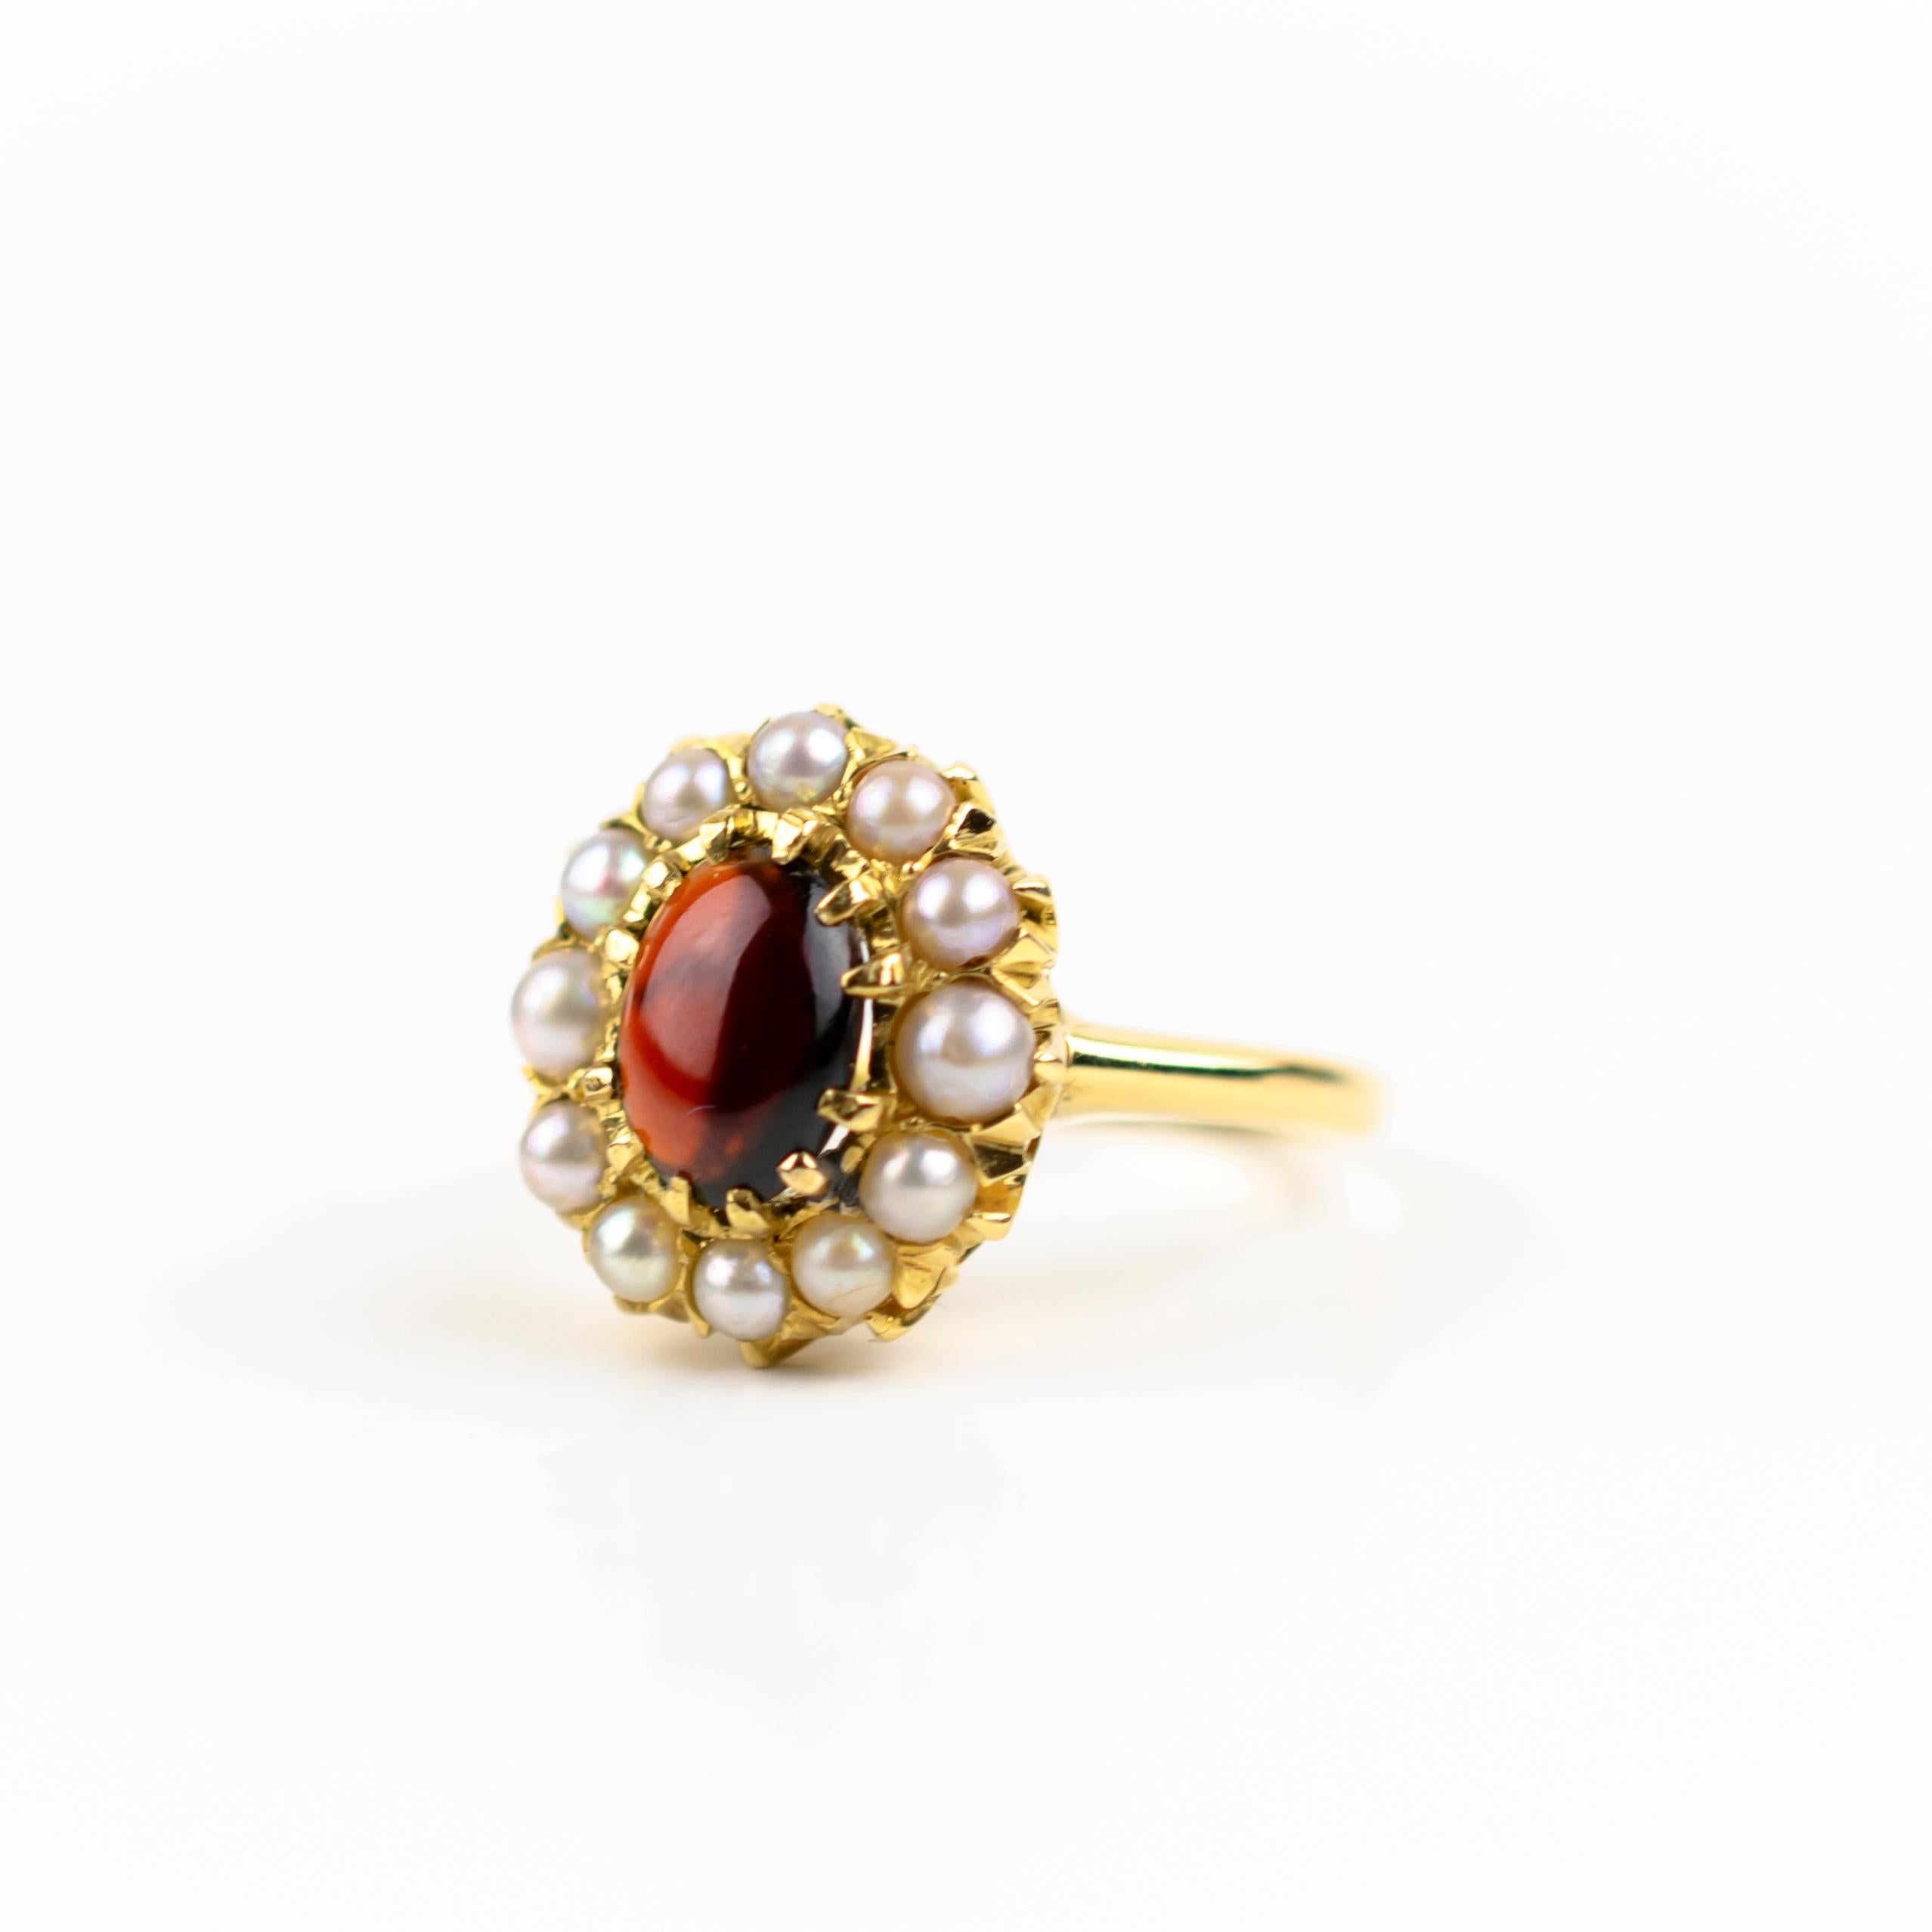 A rare 18k gold ring  set with an oval cabochon red garnet of approximately 2.35 cts., surrounded  by beautiful, evenly matched lustrous seed pearls slightly graduated in size but averaging approx. 2 mm in diameter, in a cluster mount. In pristine